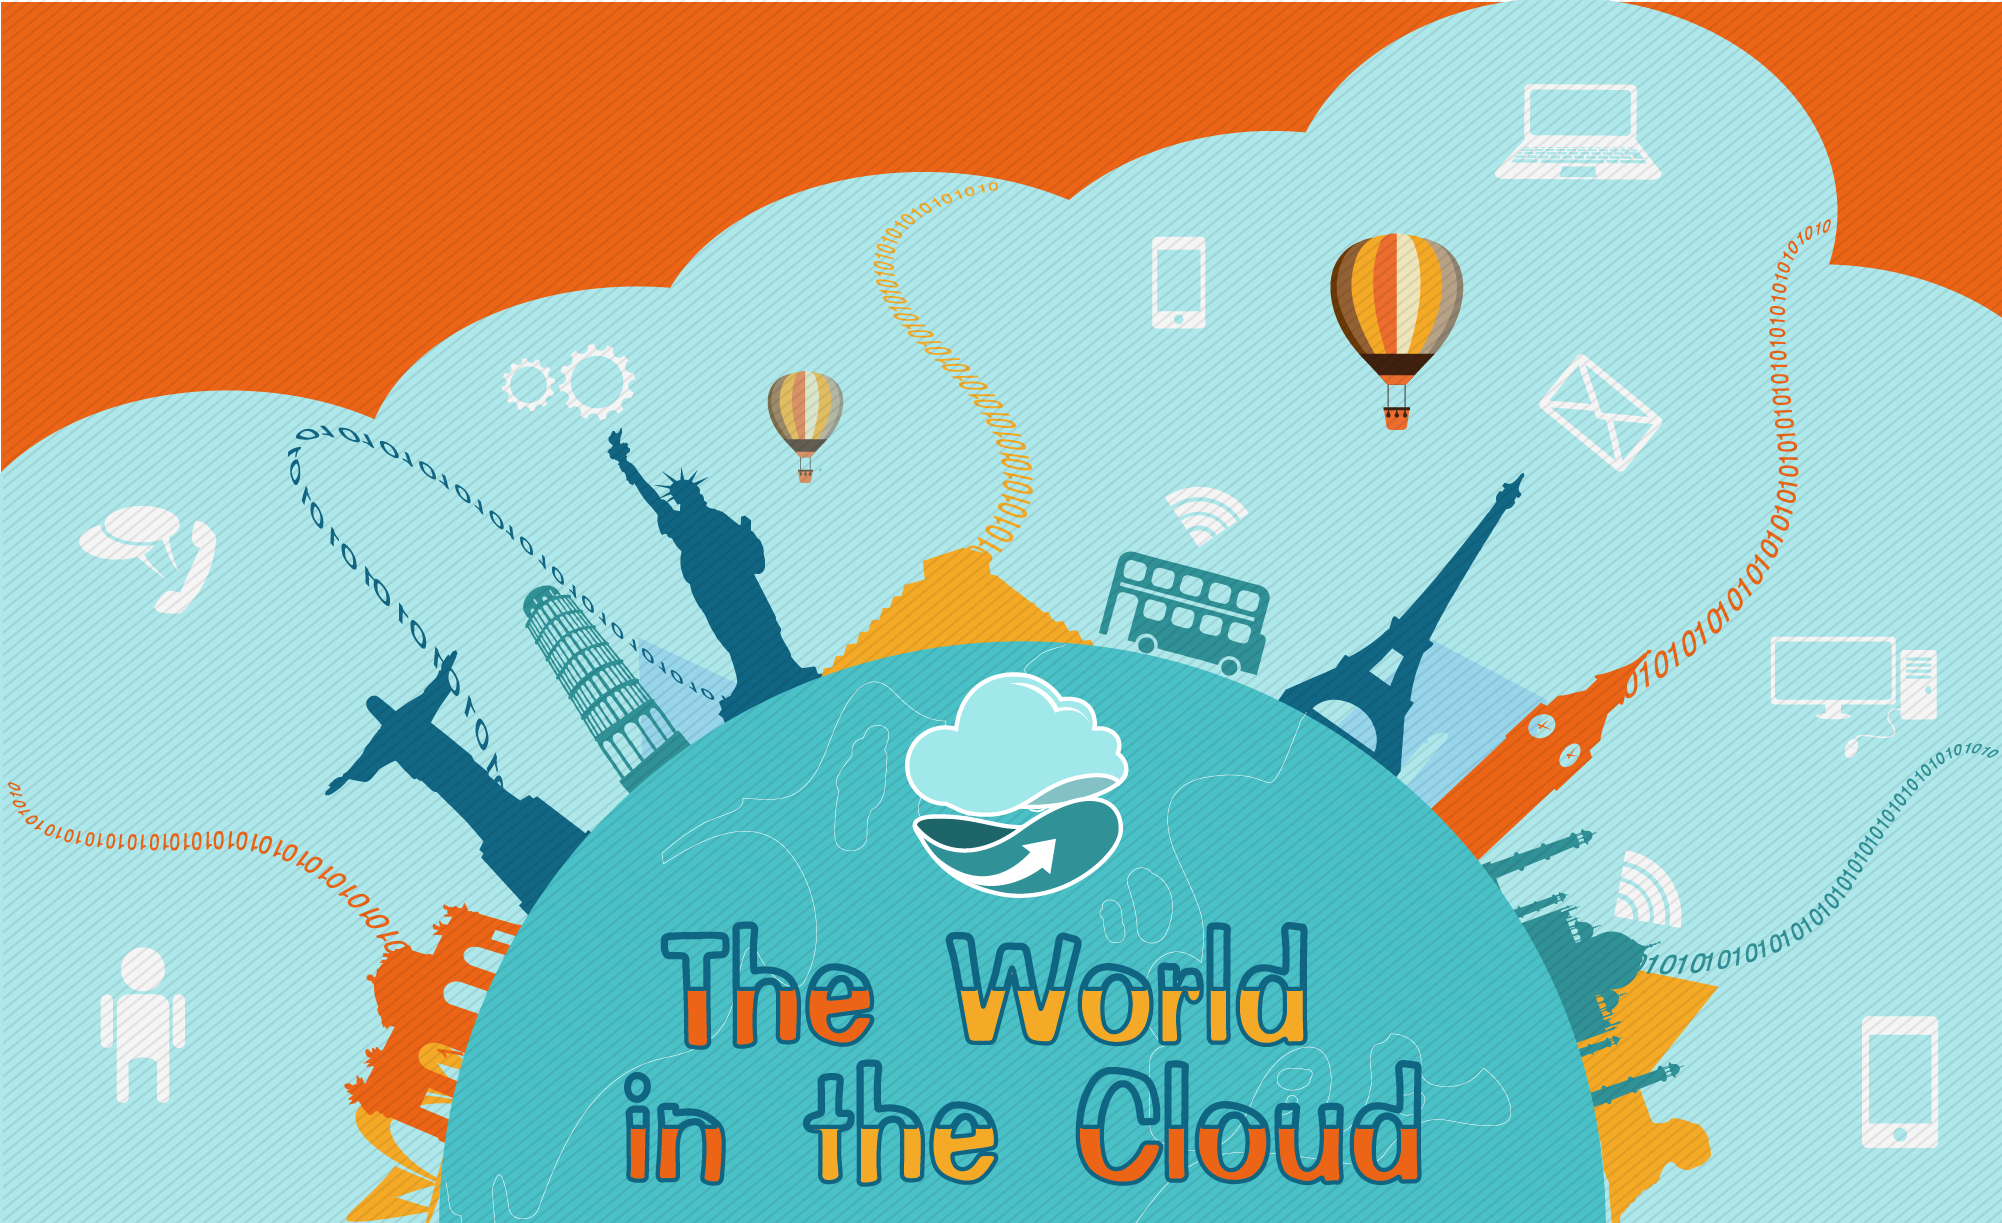 The World in the Cloud